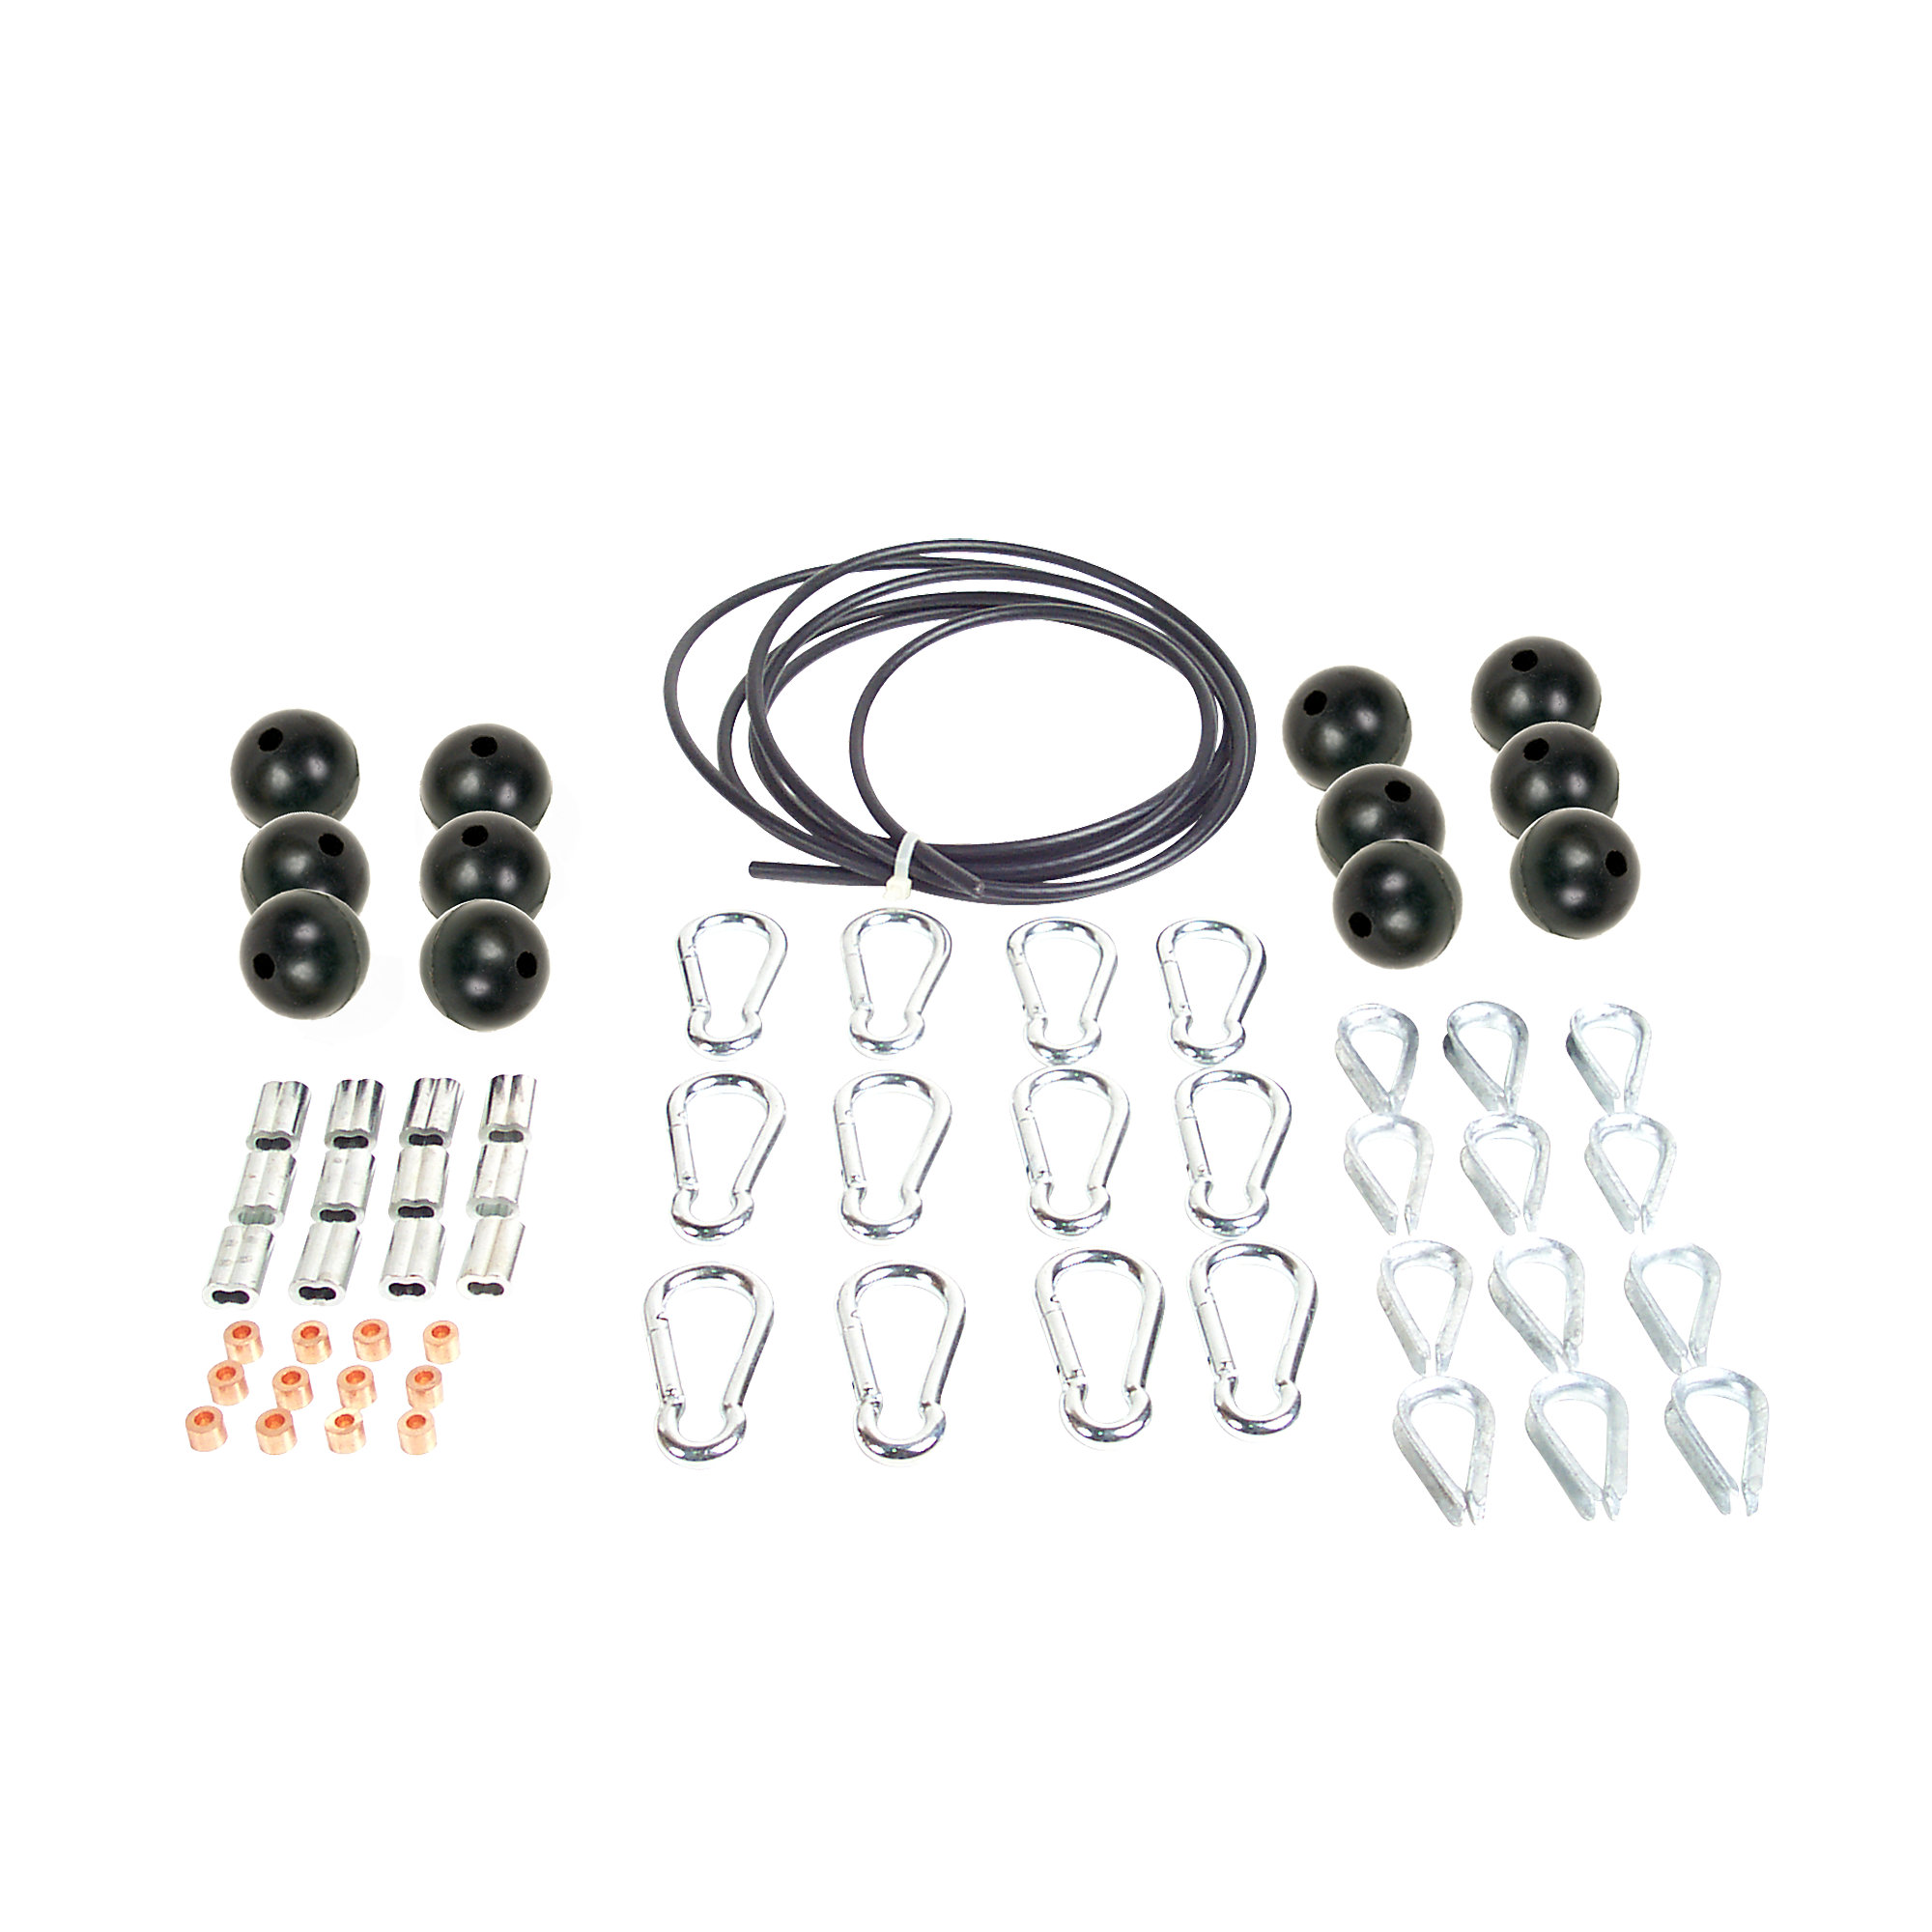 1/4" Cable and Hardware Kit